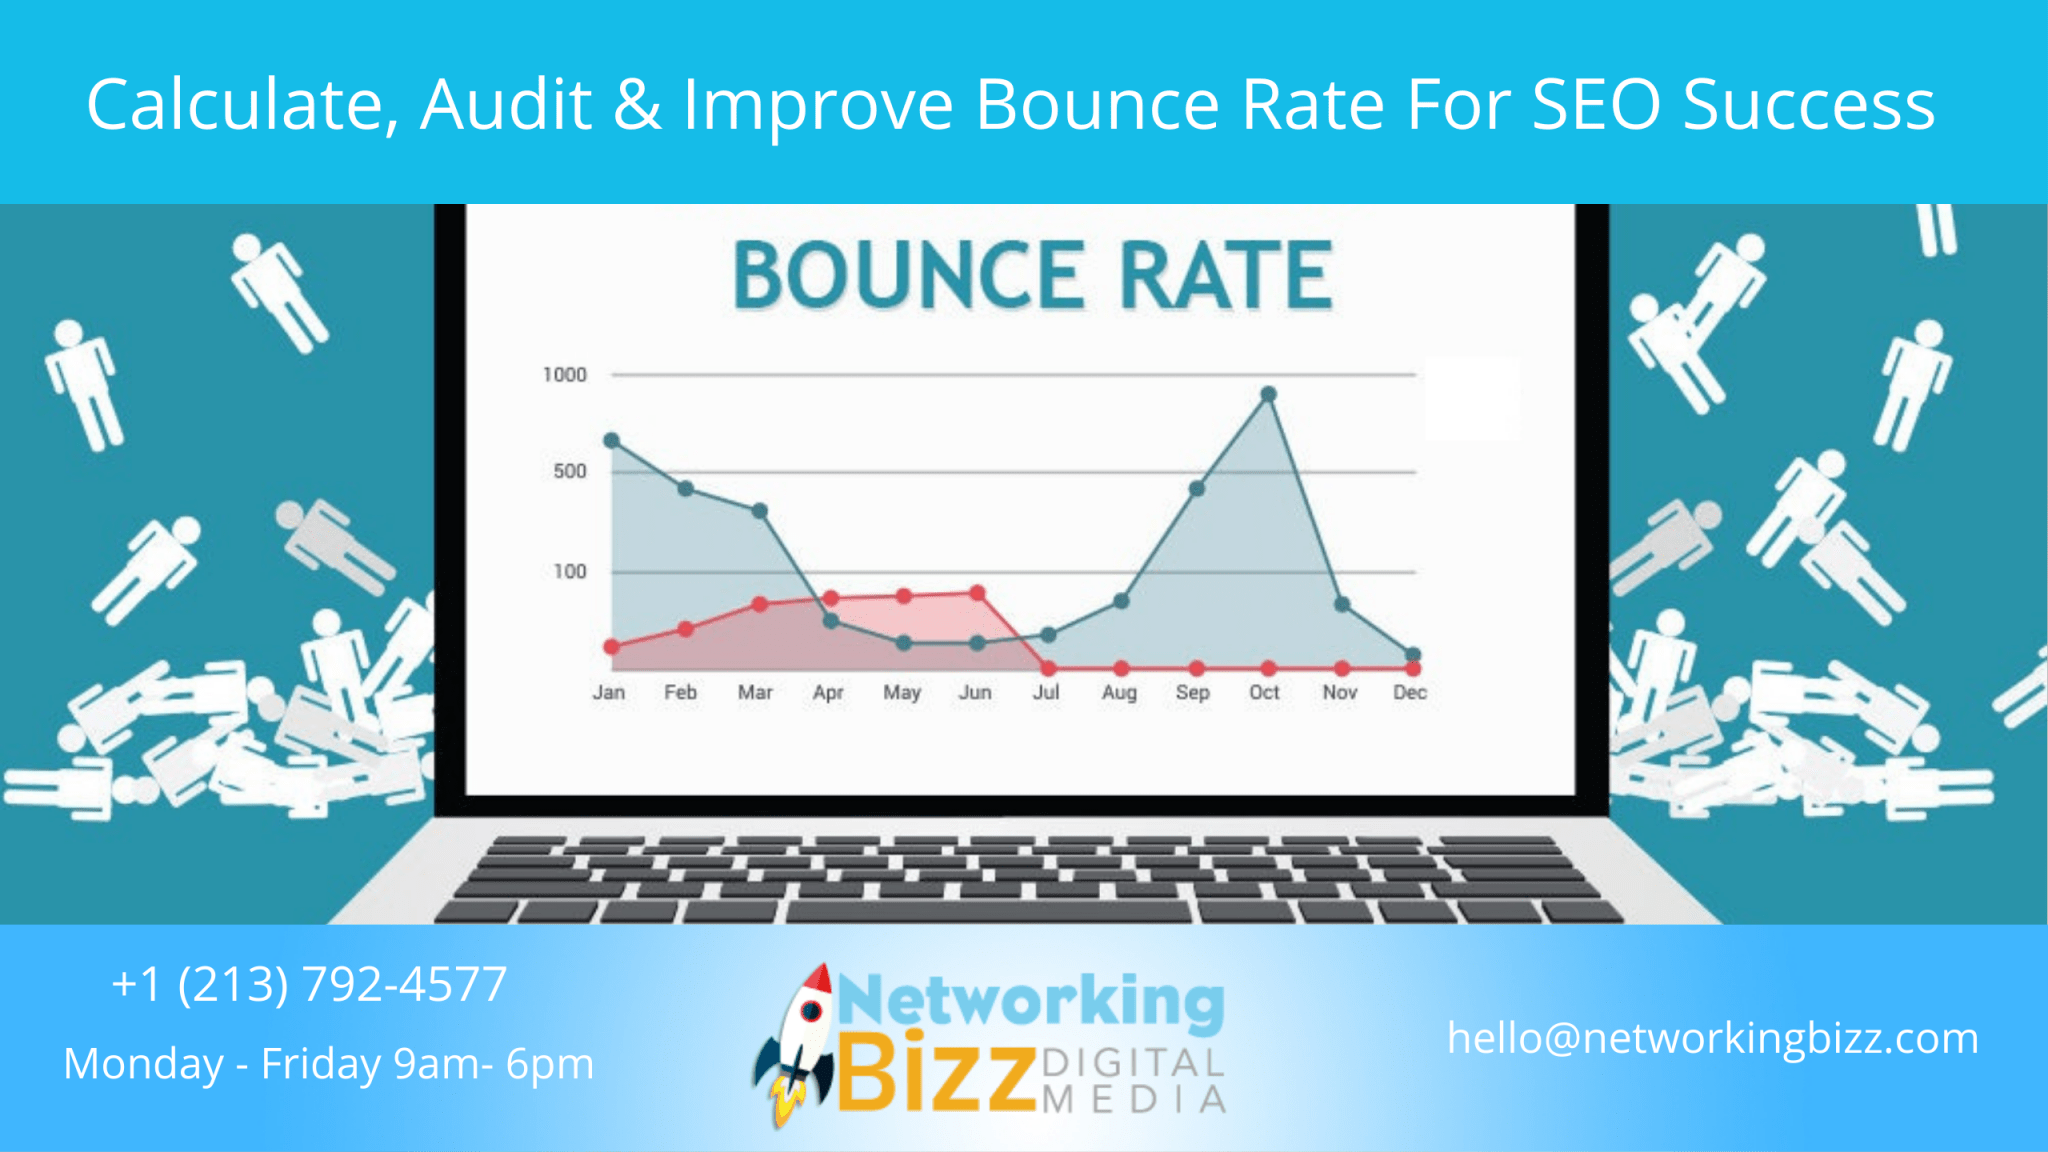 Calculate, Audit & Improve Bounce Rate For SEO Success